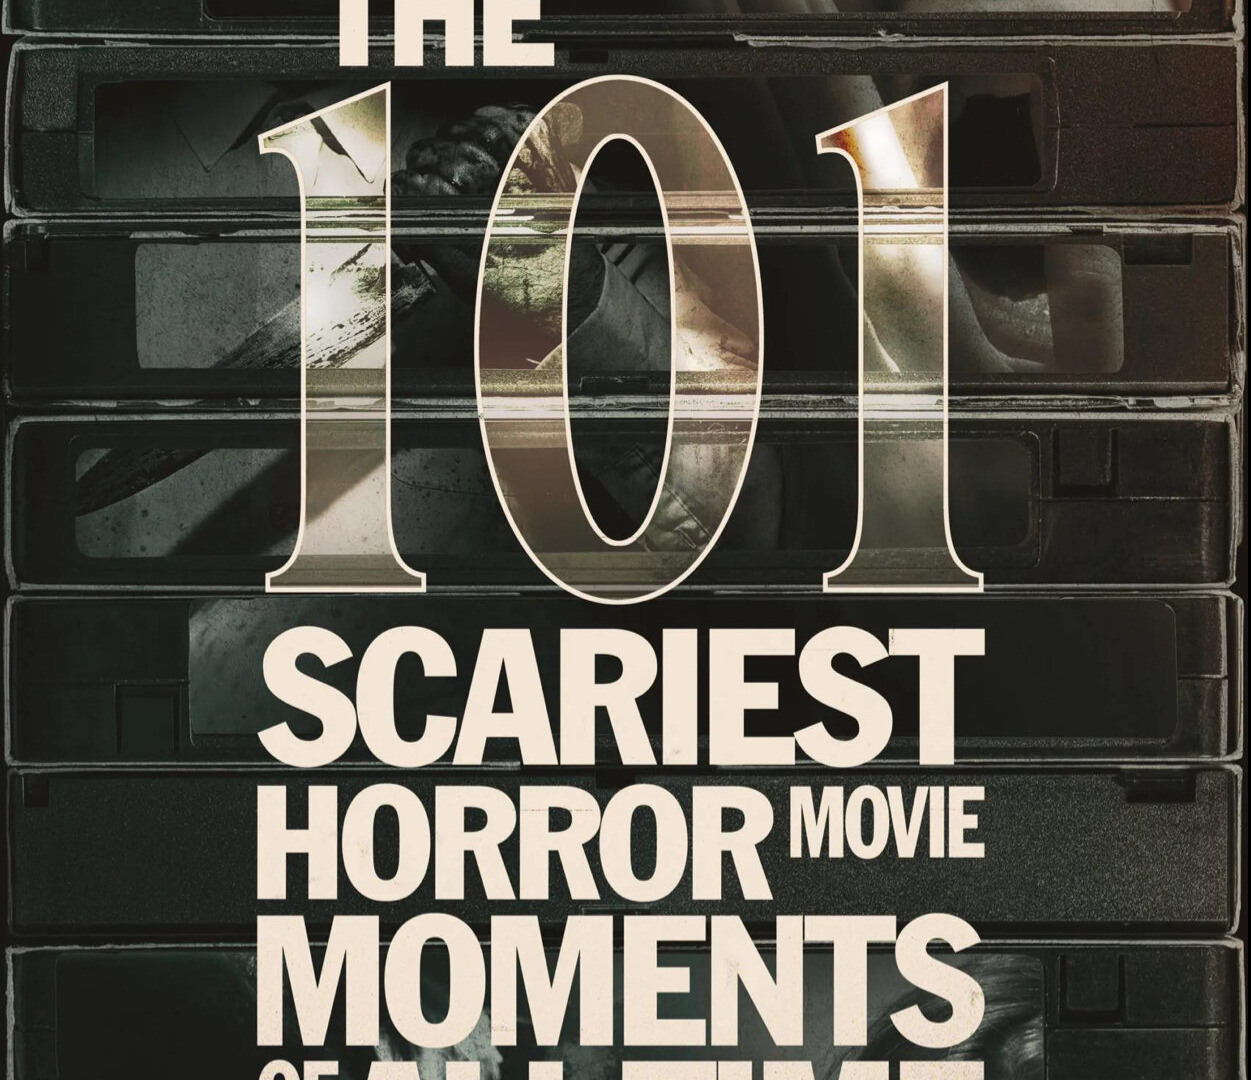 Show The 101 Scariest Horror Movie Moments of All Time